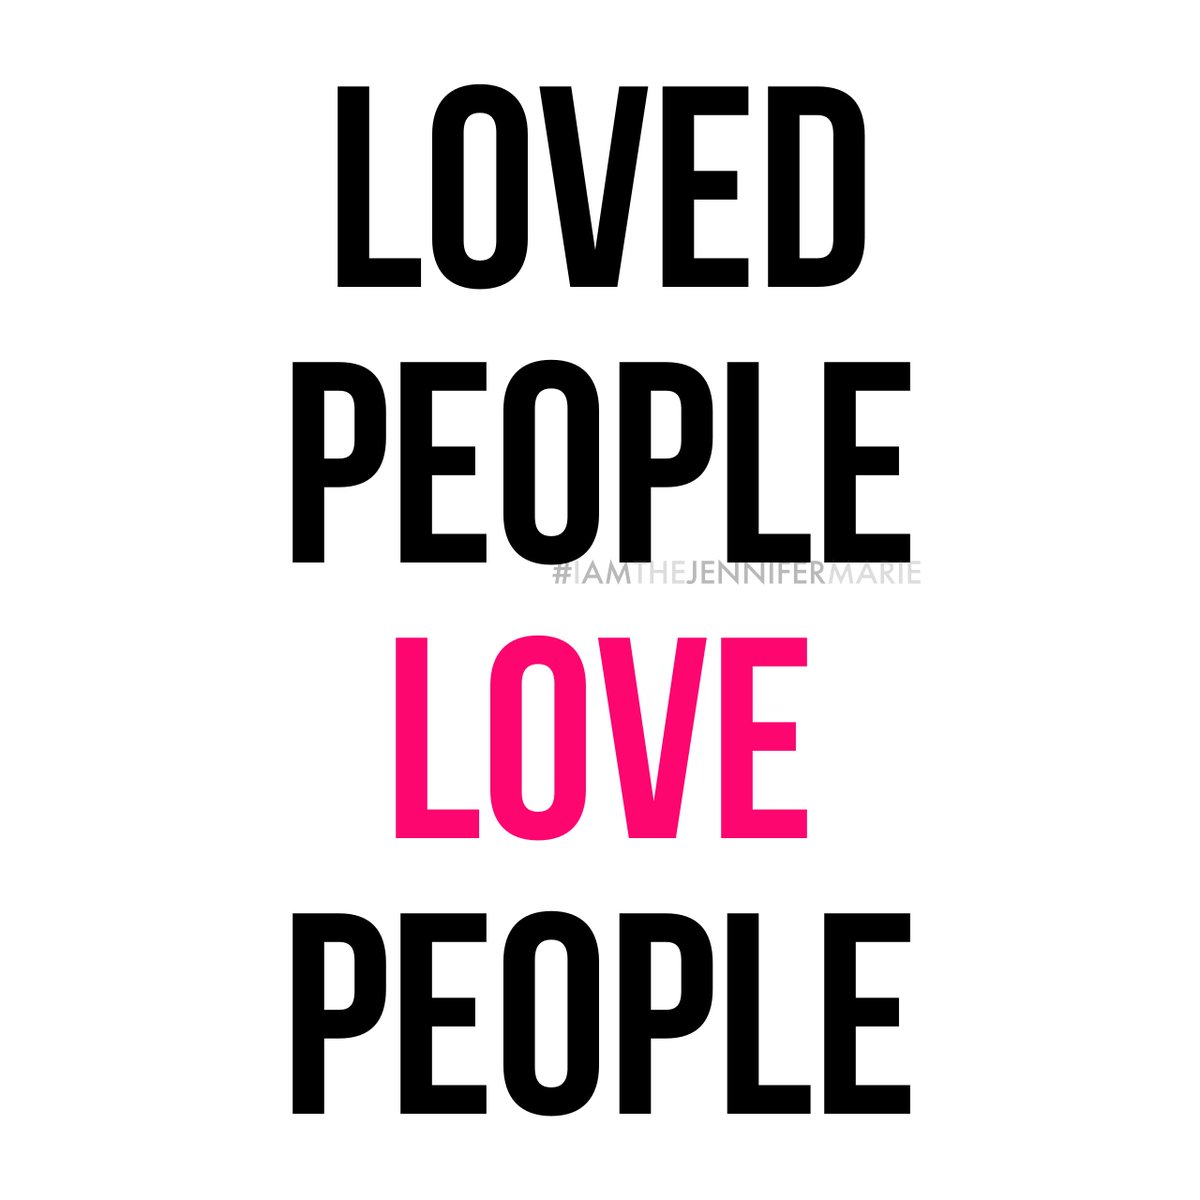 What we #focus on grows, right? So focus on the #Love. If #HurtPeople hurt people, then #loved people #LovePeople. #BeLove
____
#BelleÂme #IAmTheJenniferMarie #WednesdayWisdom #KeepLoving #LoveAlways #LoveIs #ShareLove #GiveLove #AcceptLove #ReceiveLove #GodIsLove